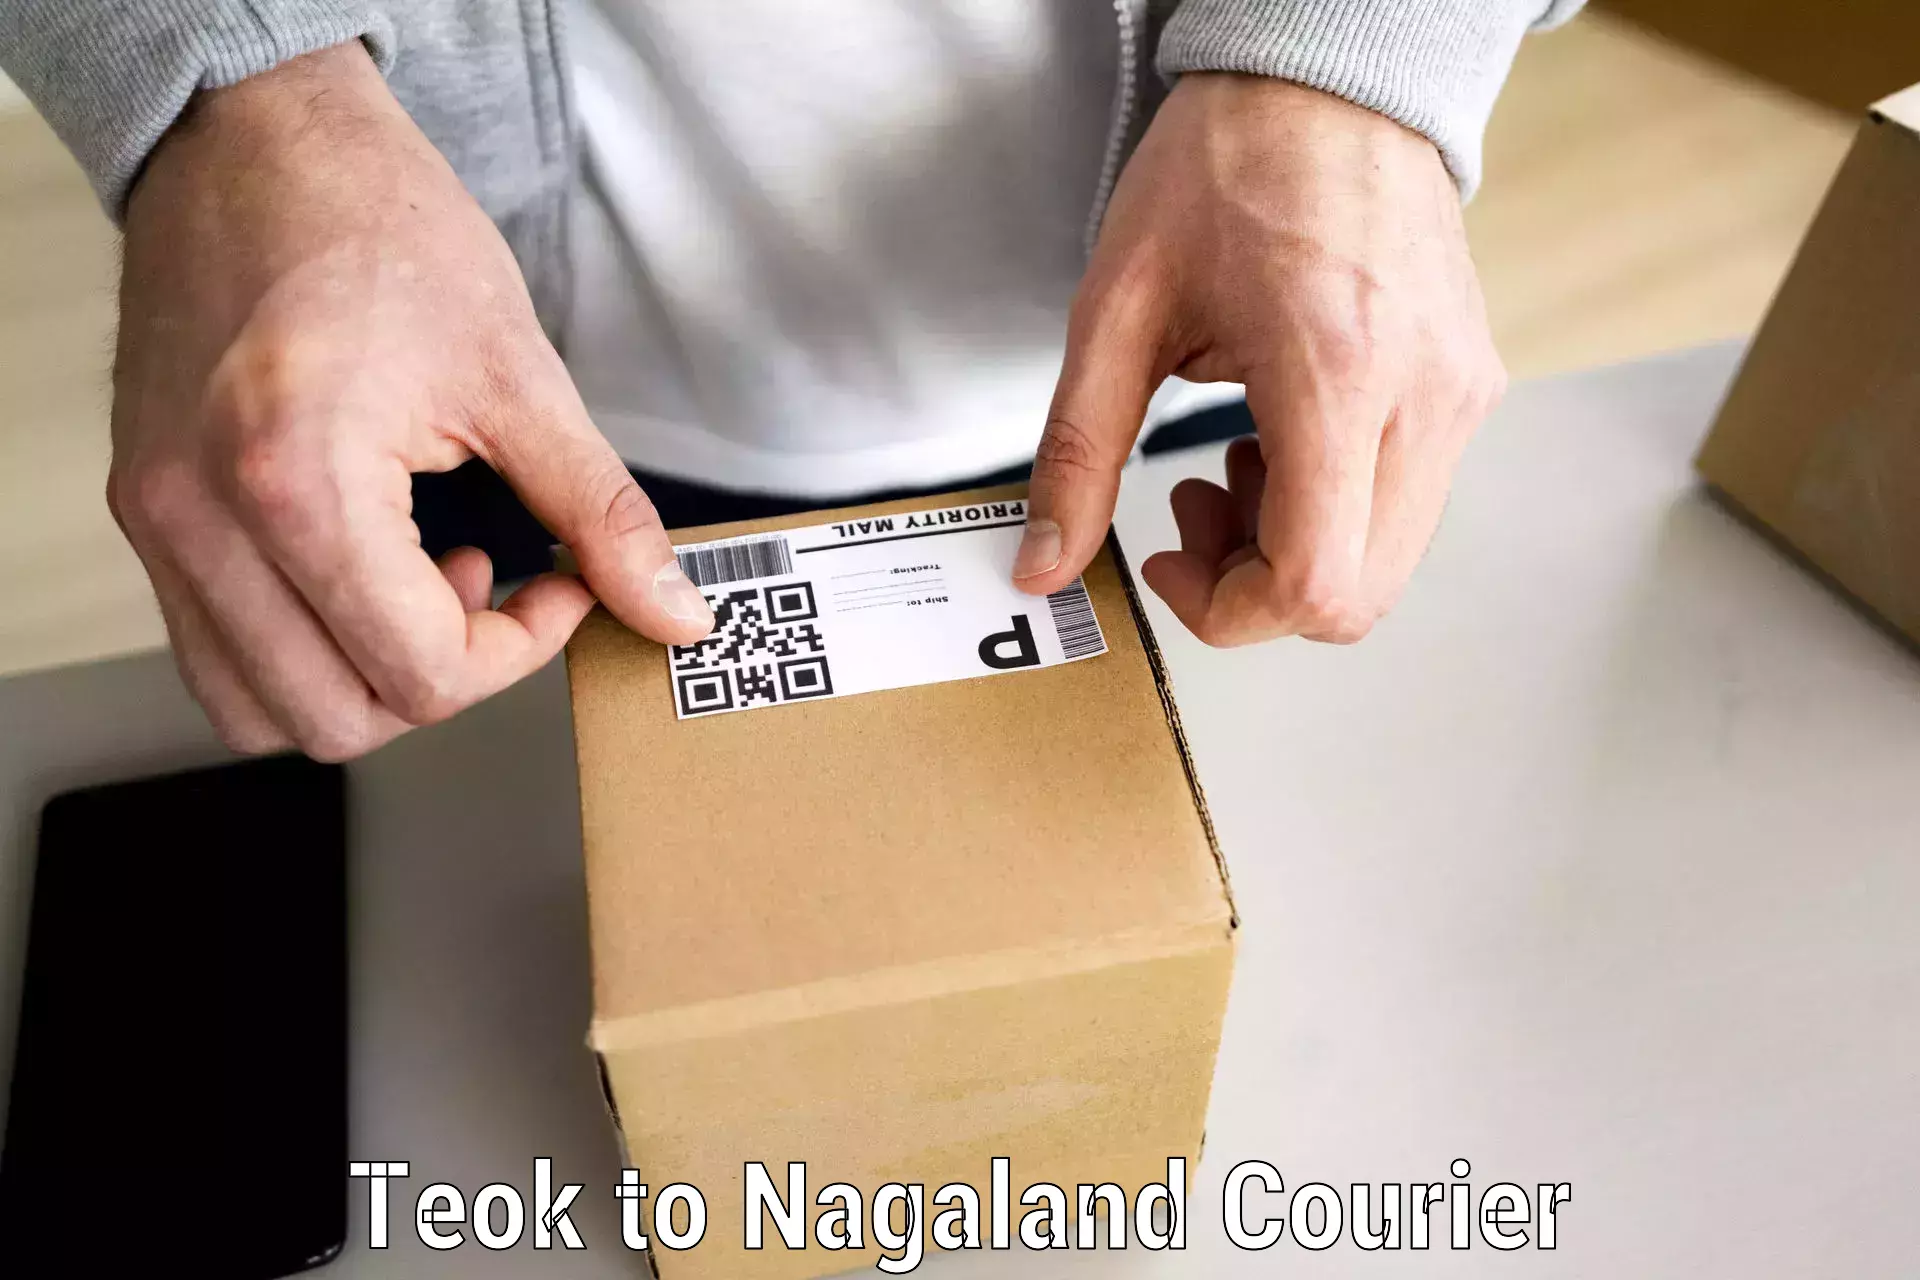 Furniture delivery service Teok to Nagaland